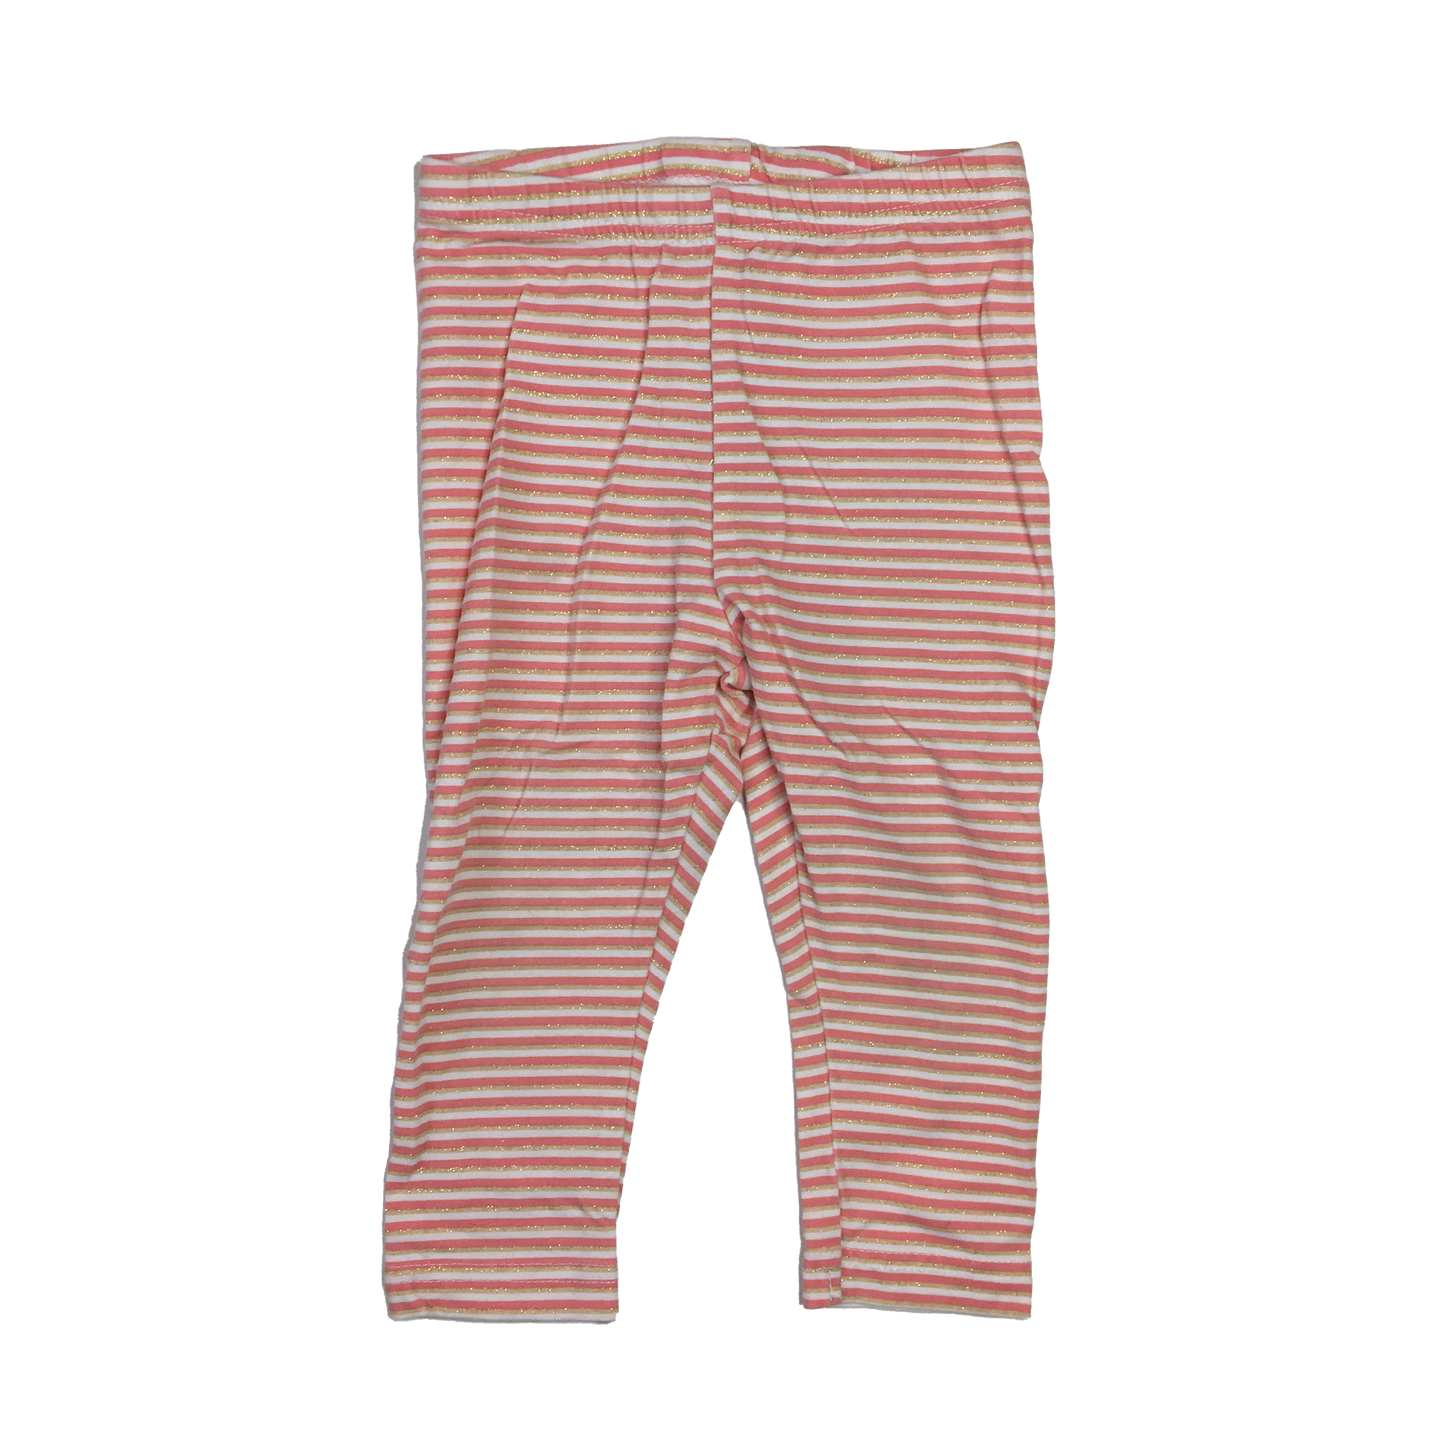 Carter's Pink with Shiny Stripes 18M